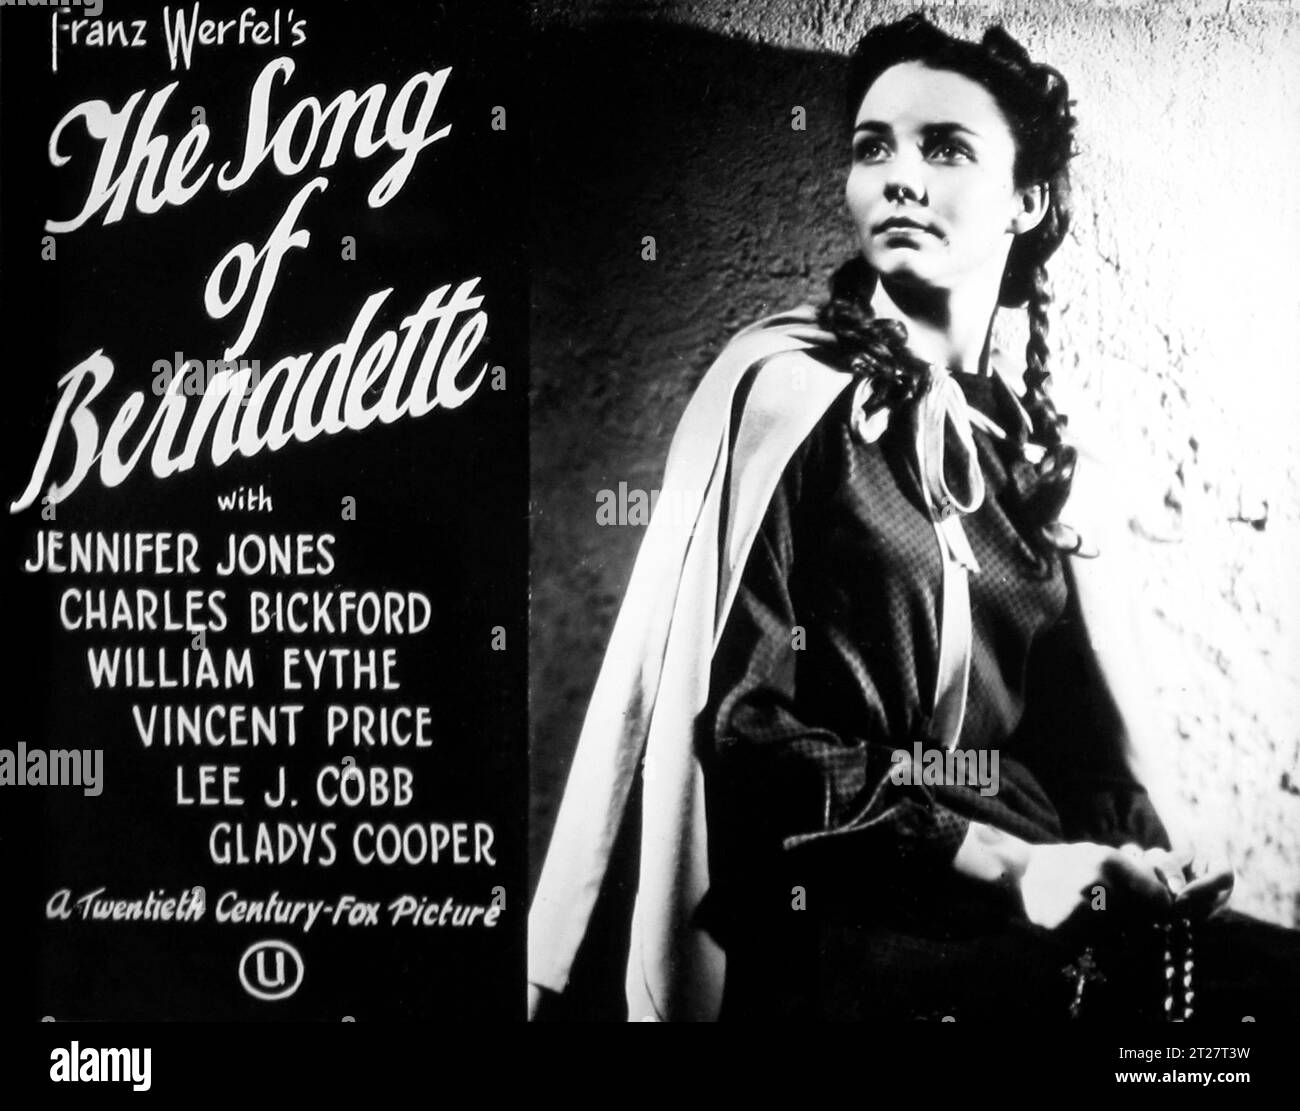 Cinema advertisement for 'The Song of Bernadette' movie in 1943 Stock Photo